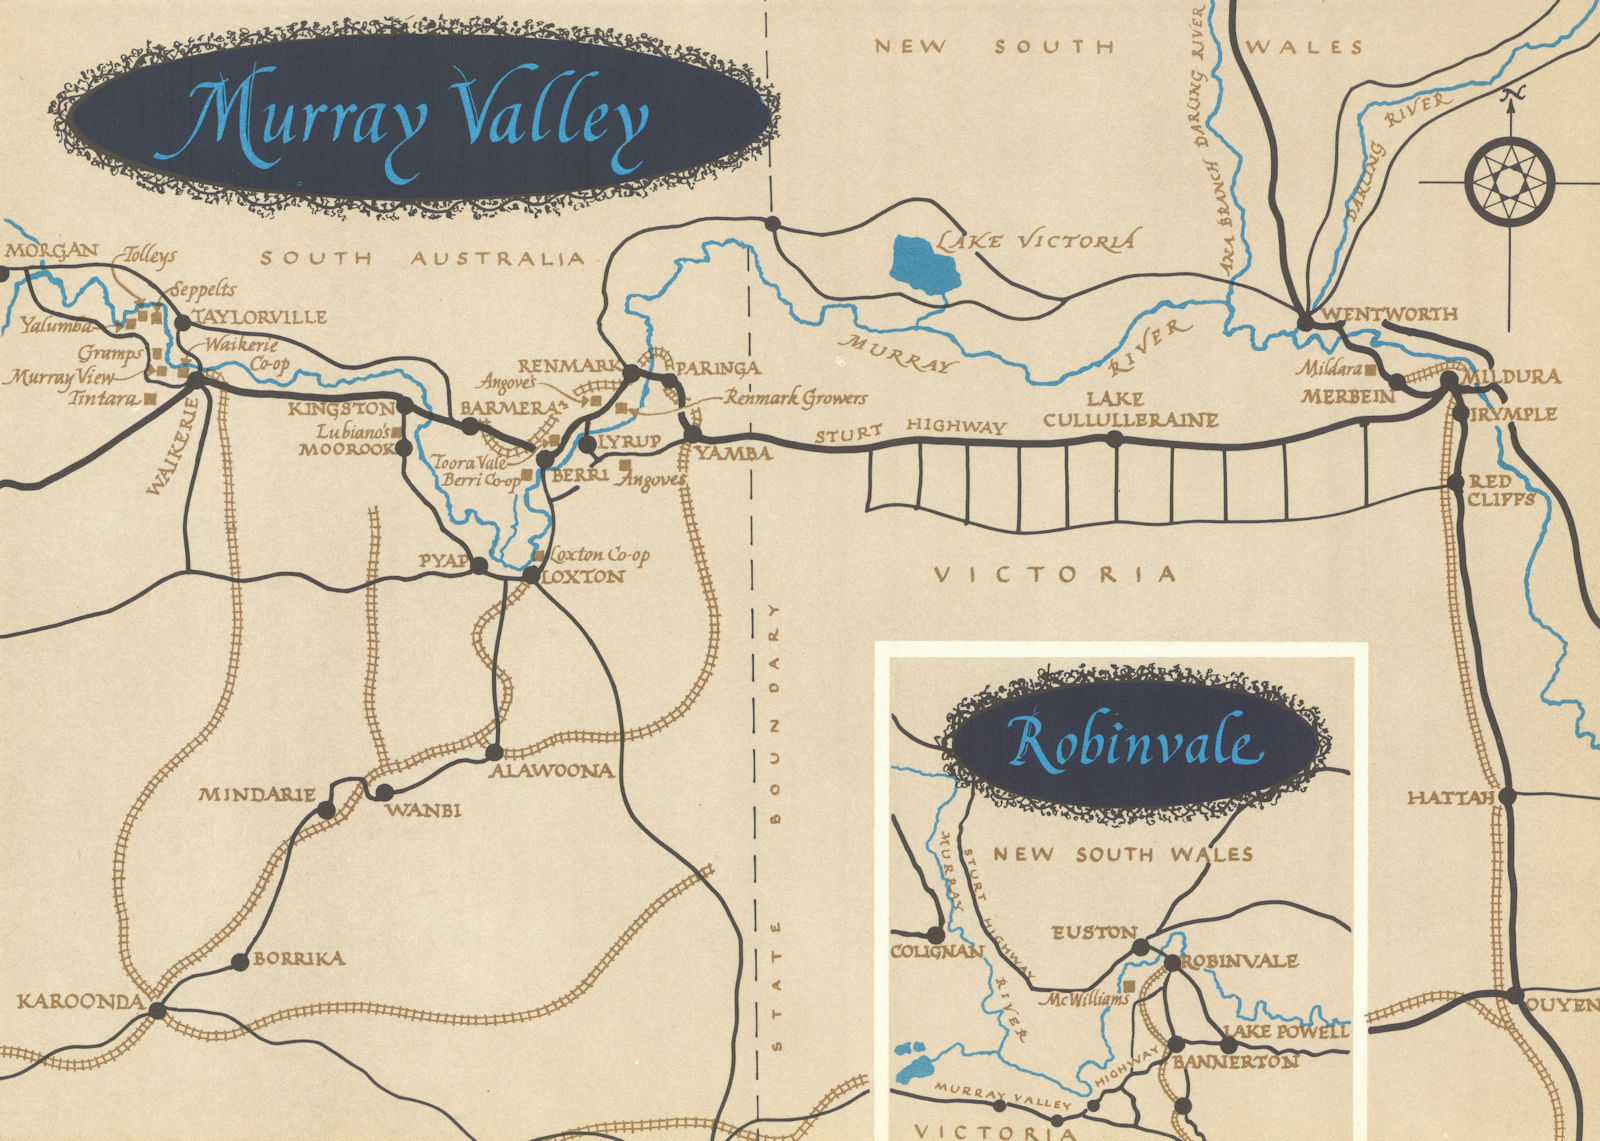 Associate Product Murray Valley & Robinvale. New South Wales & Victoria wineries 1966 old map